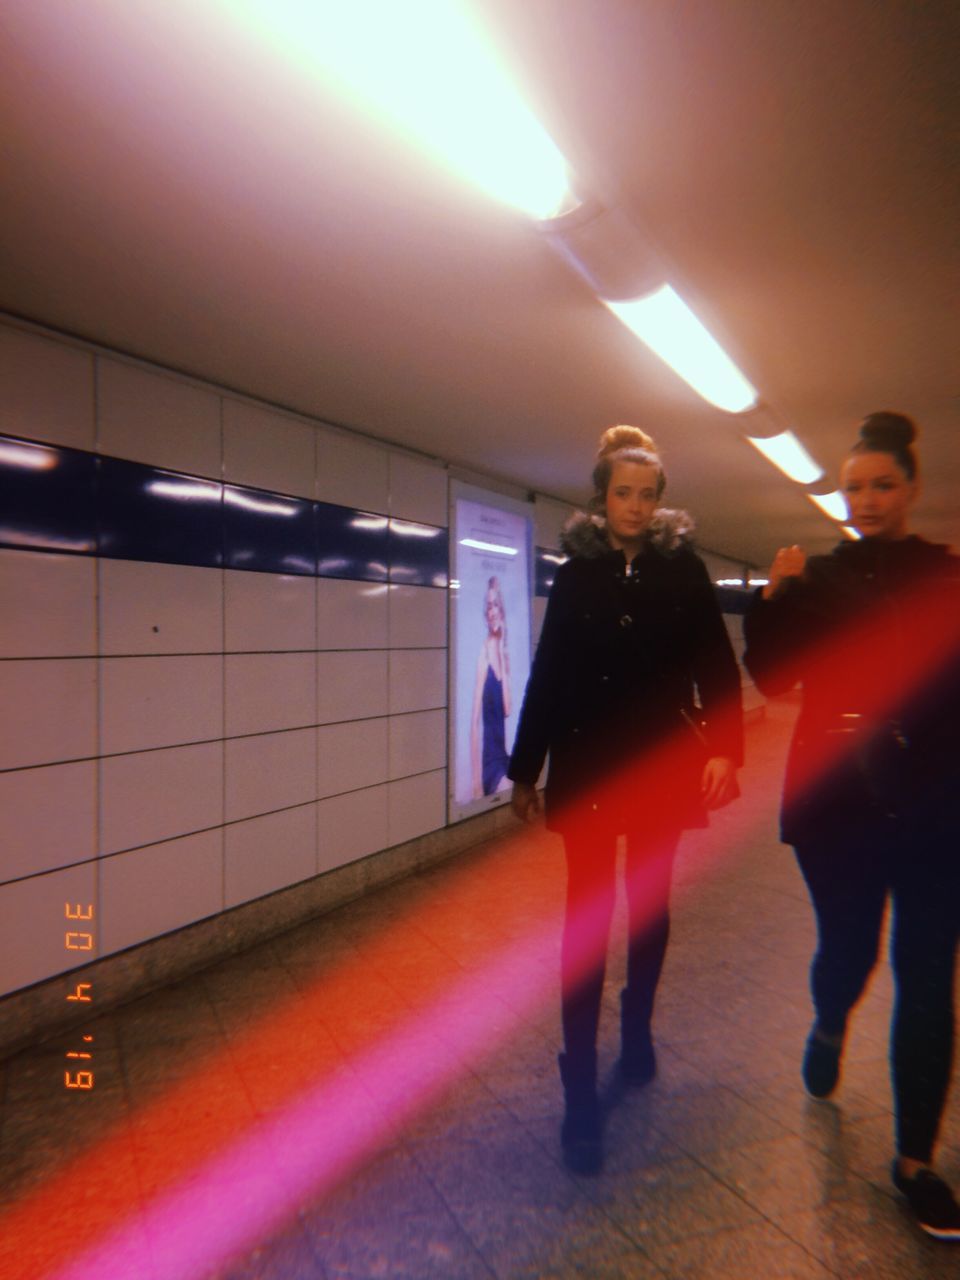 illuminated, real people, full length, men, indoors, lifestyles, women, people, architecture, leisure activity, walking, adult, casual clothing, public transportation, subway, group of people, incidental people, lighting equipment, ceiling